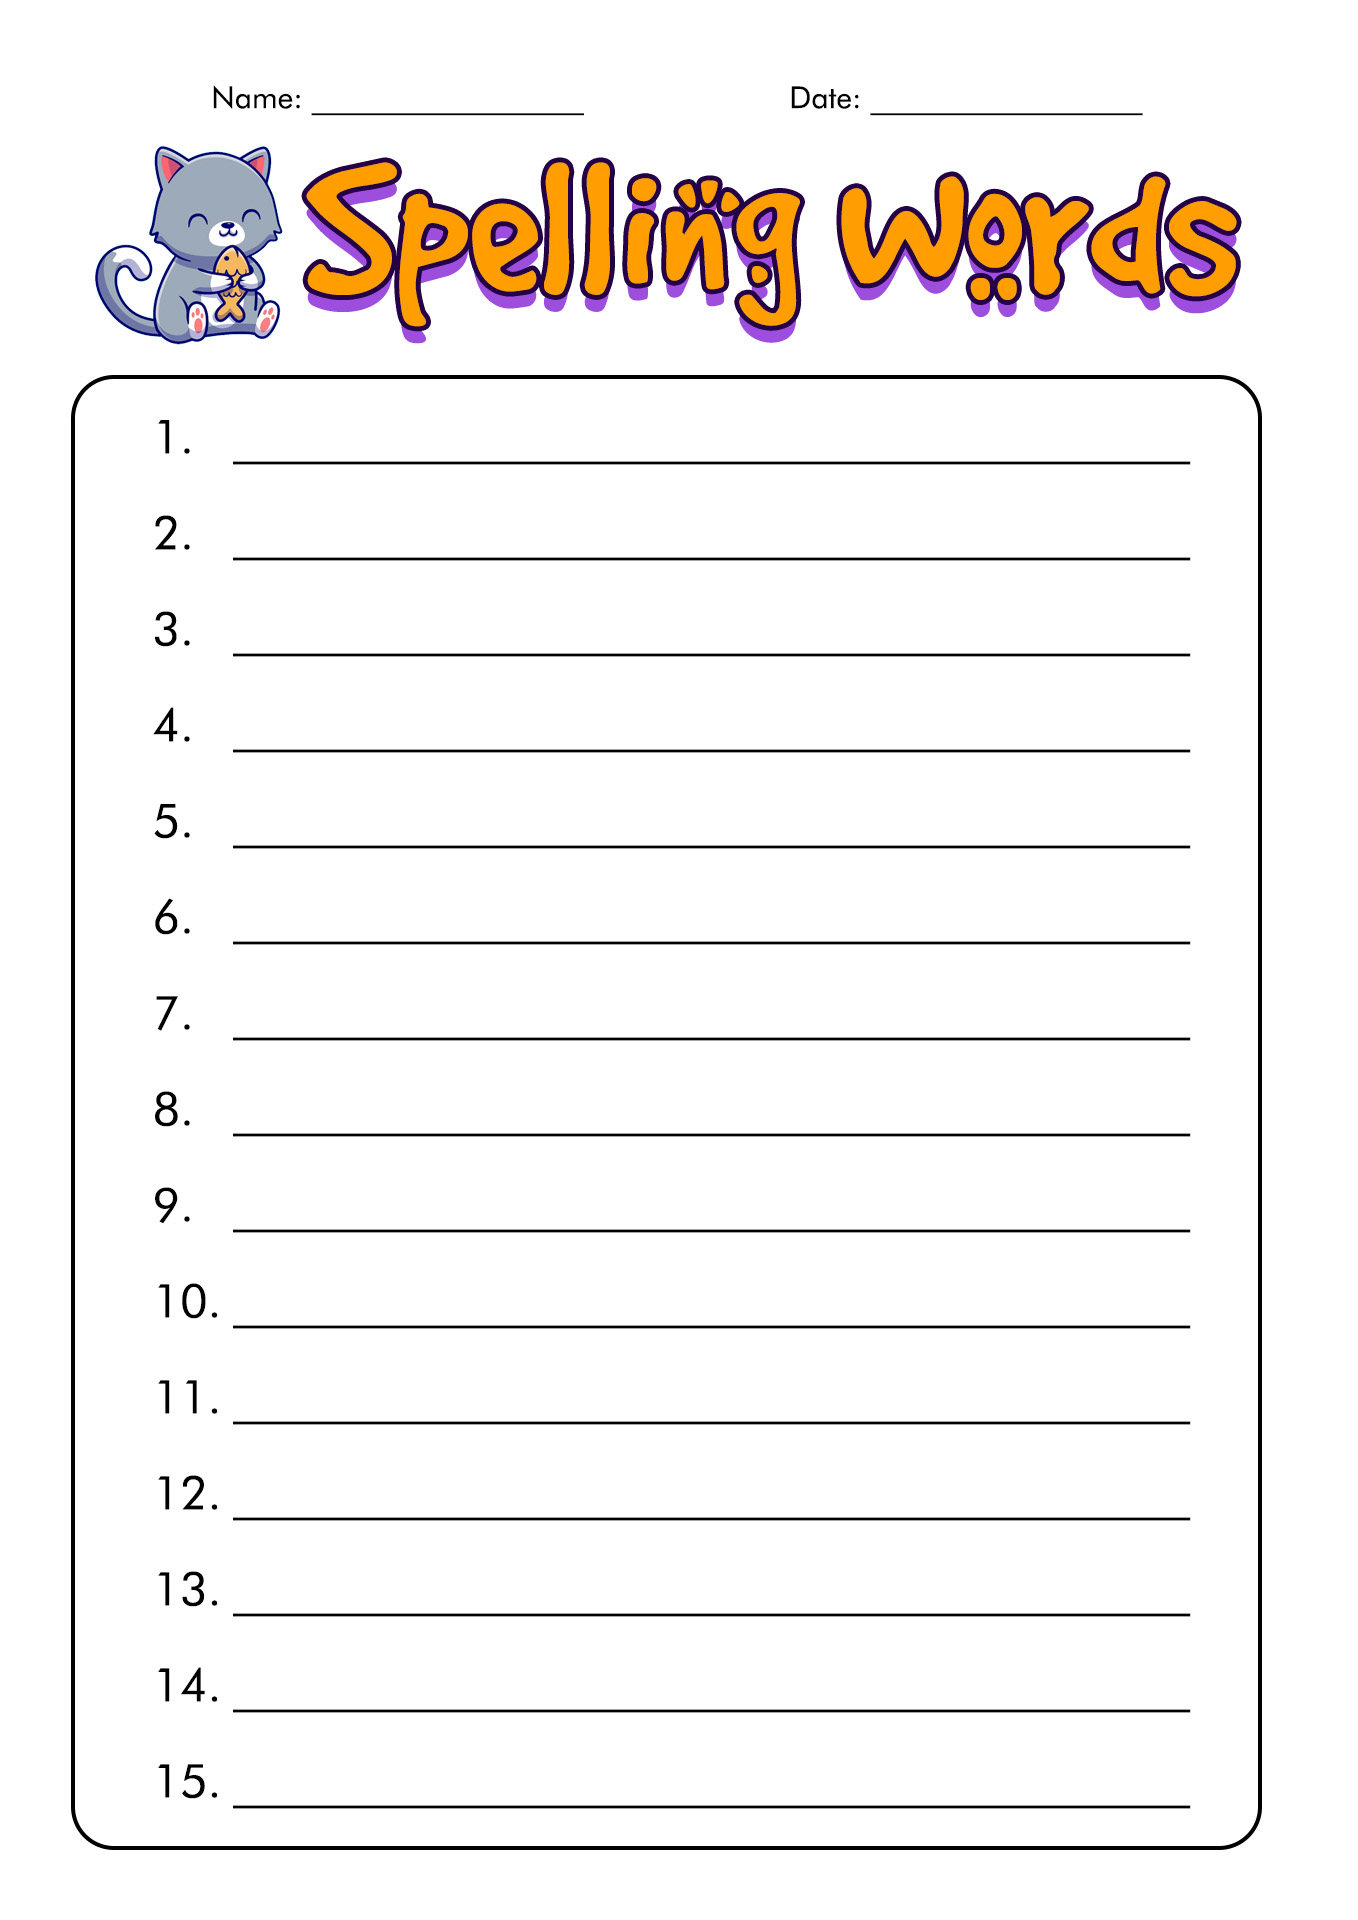 Blank Spelling Test Template Image